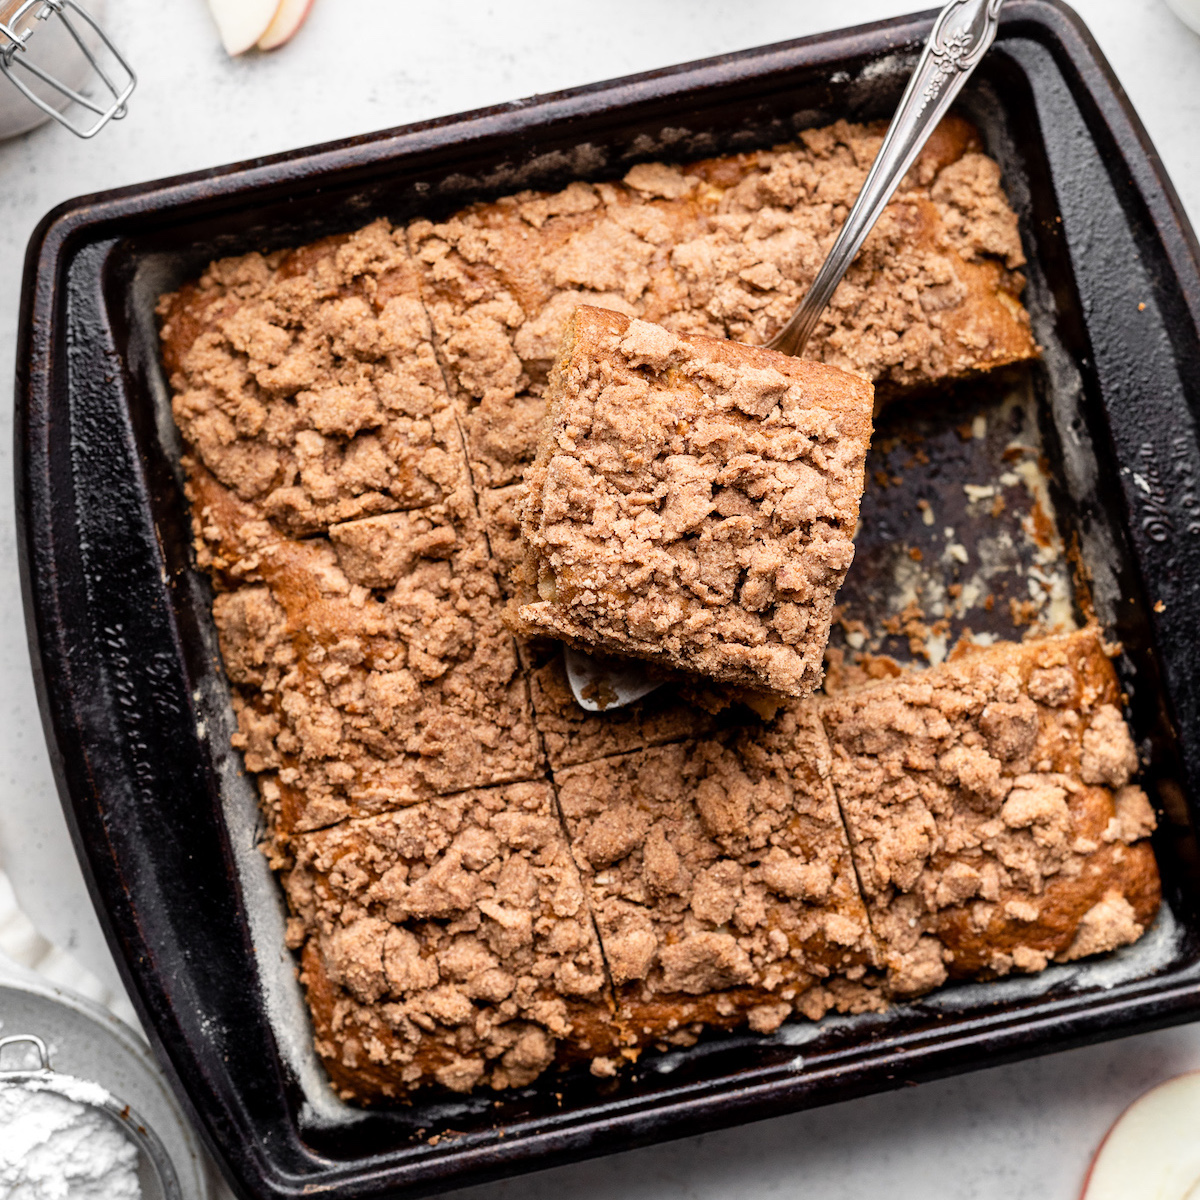 Silver serving spoon lifting a slice of coffee cake out of a square black baking pan.